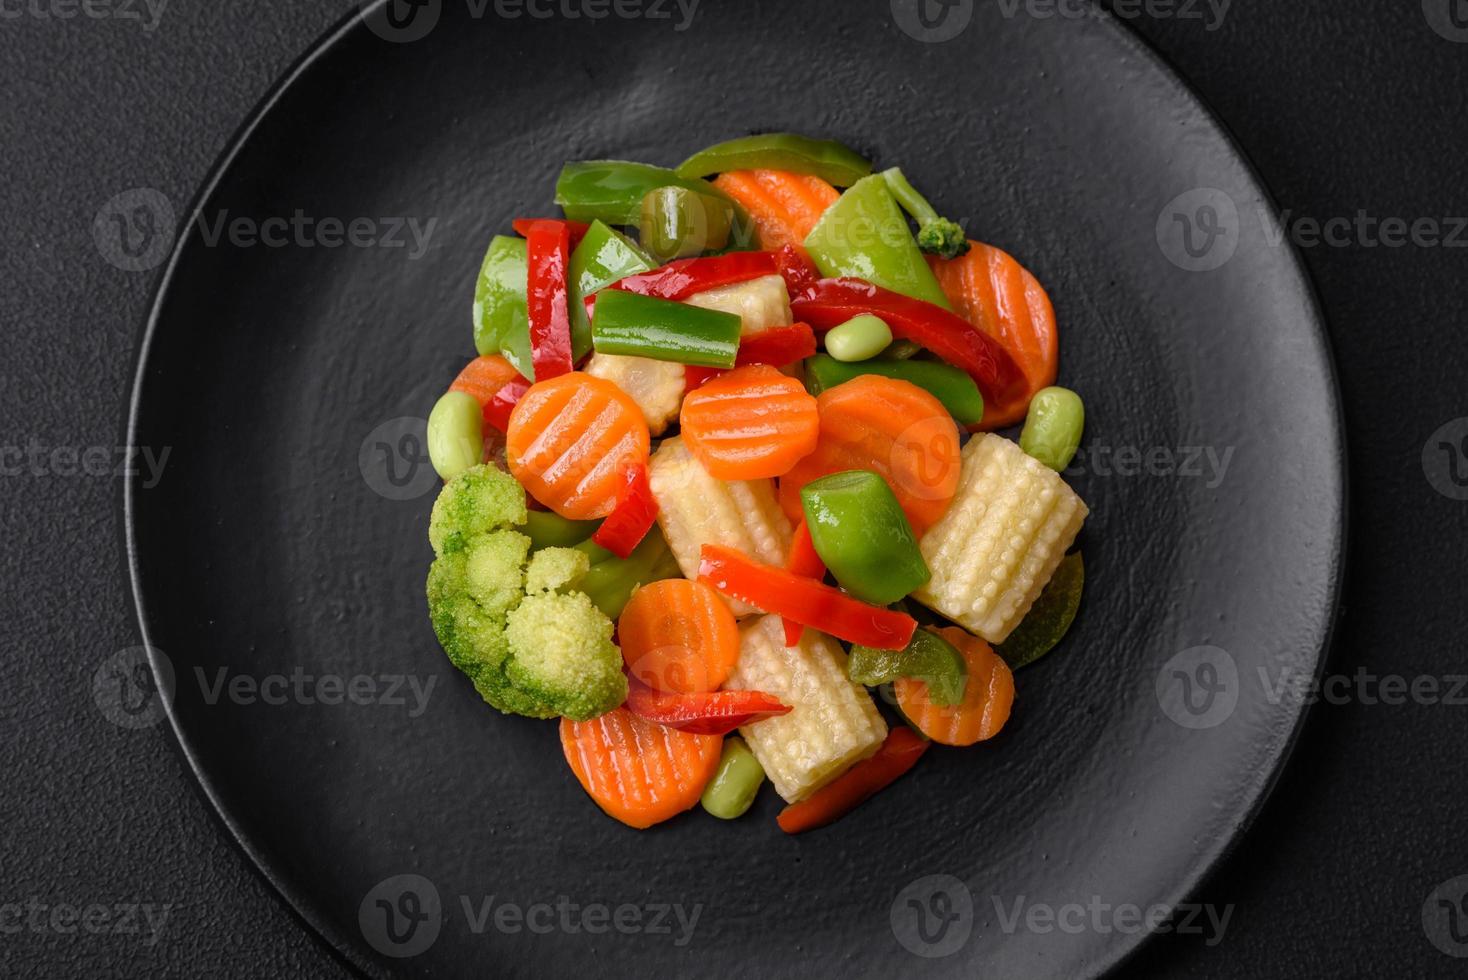 Delicious juicy broccoli vegetables, carrots, asparagus beans and bell peppers photo